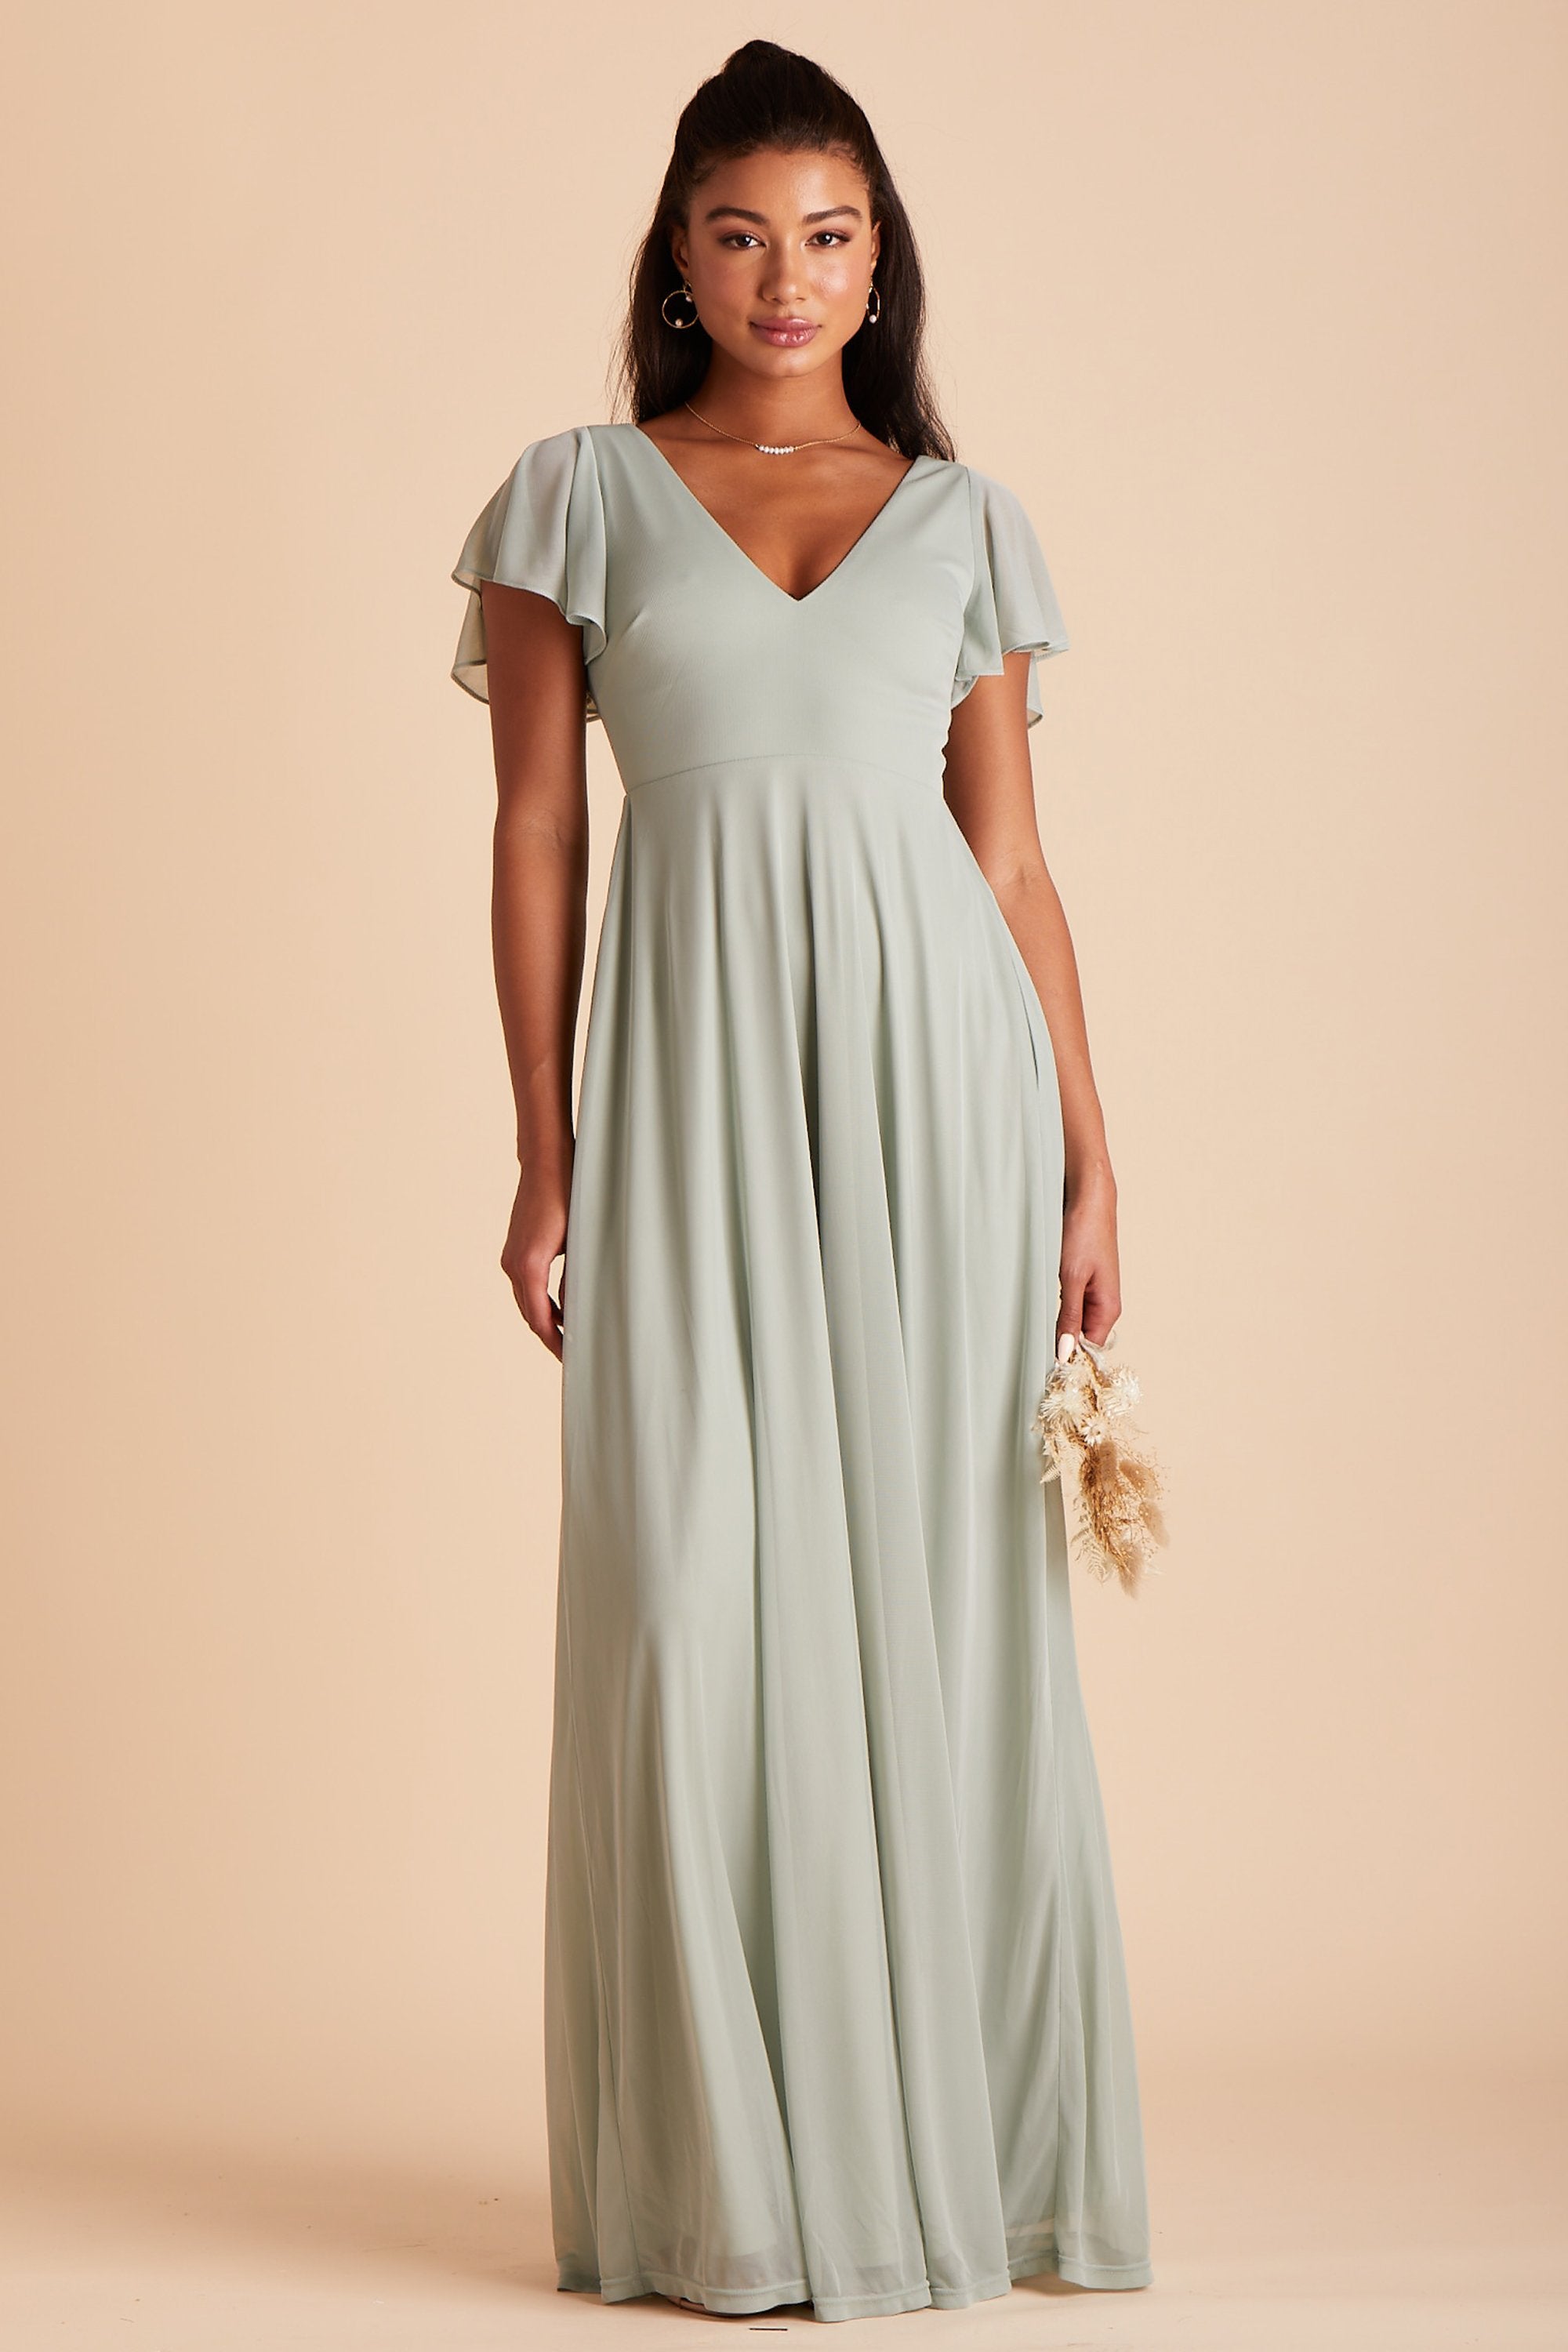 Hannah bridesmaids dress in sage green mesh by Birdy Grey, front view